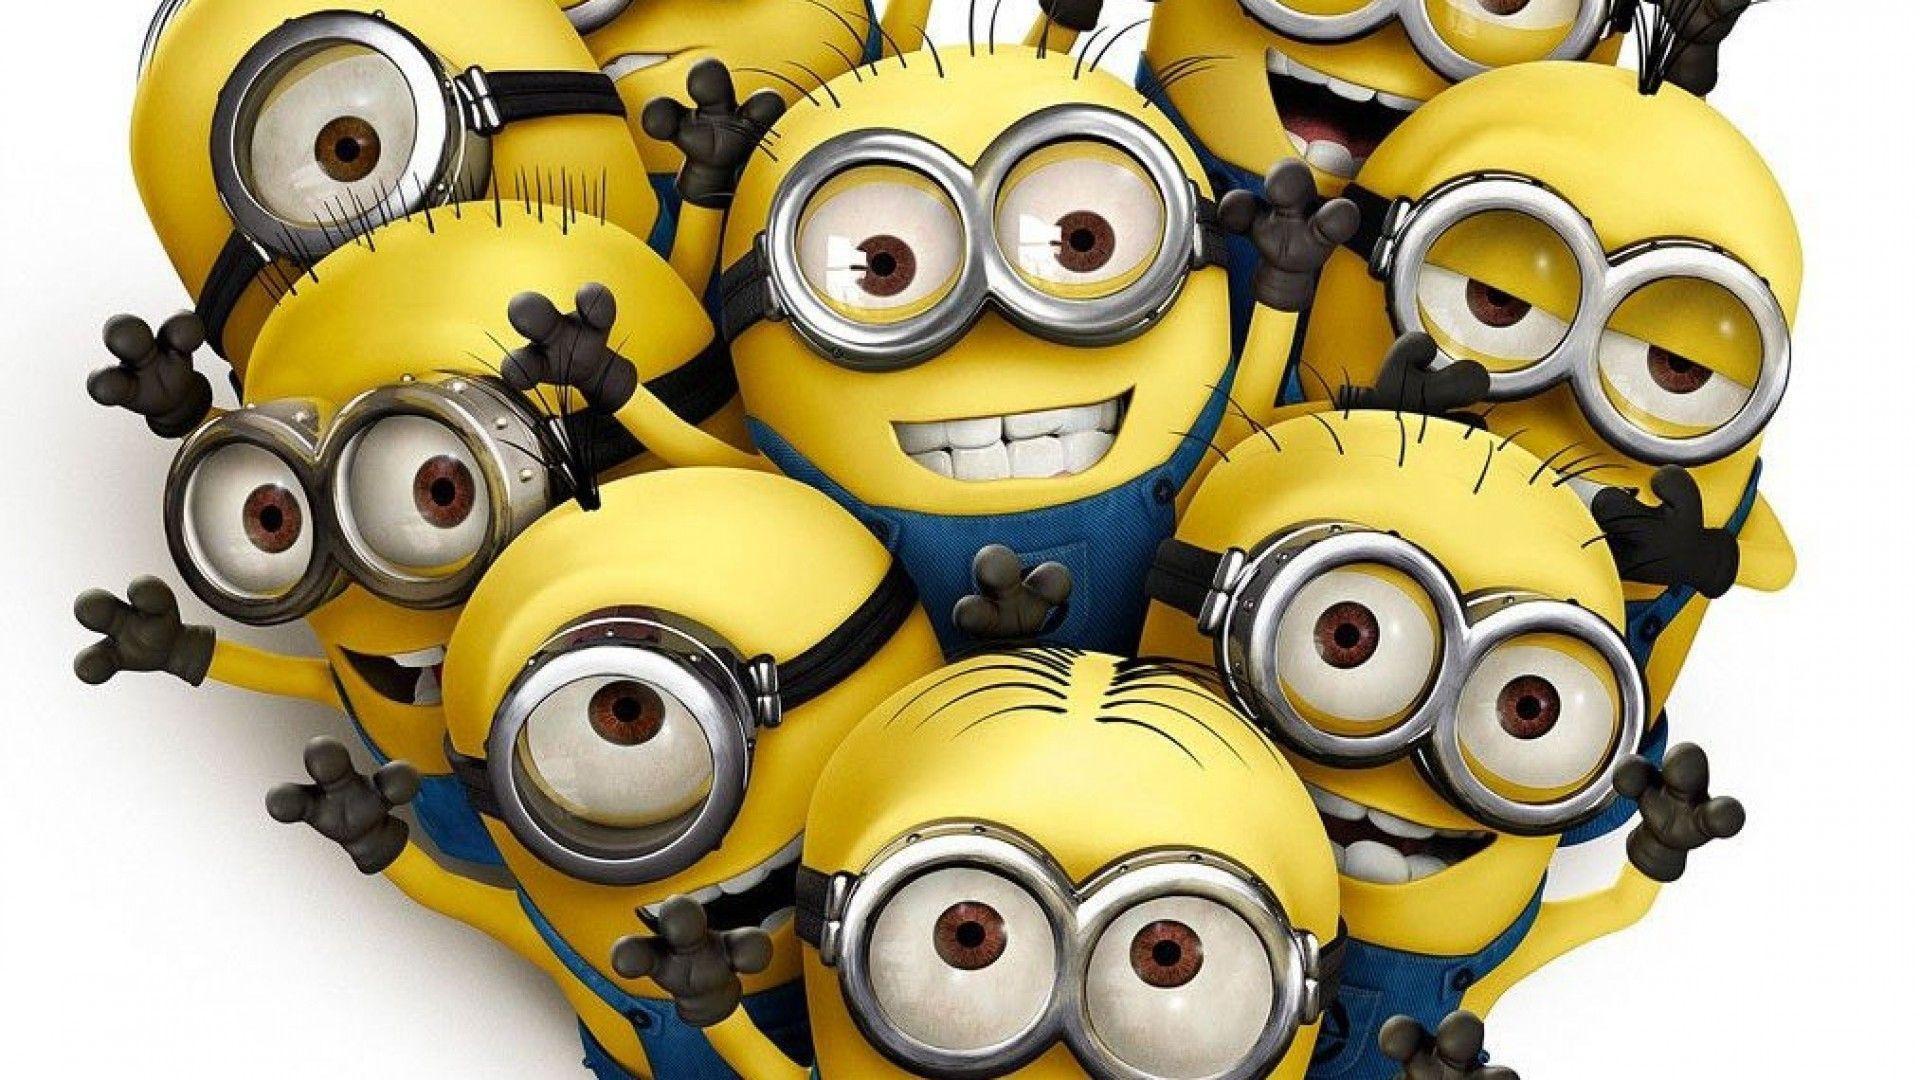 Minions Wallpapers HD Minions Backgrounds Free Images Download